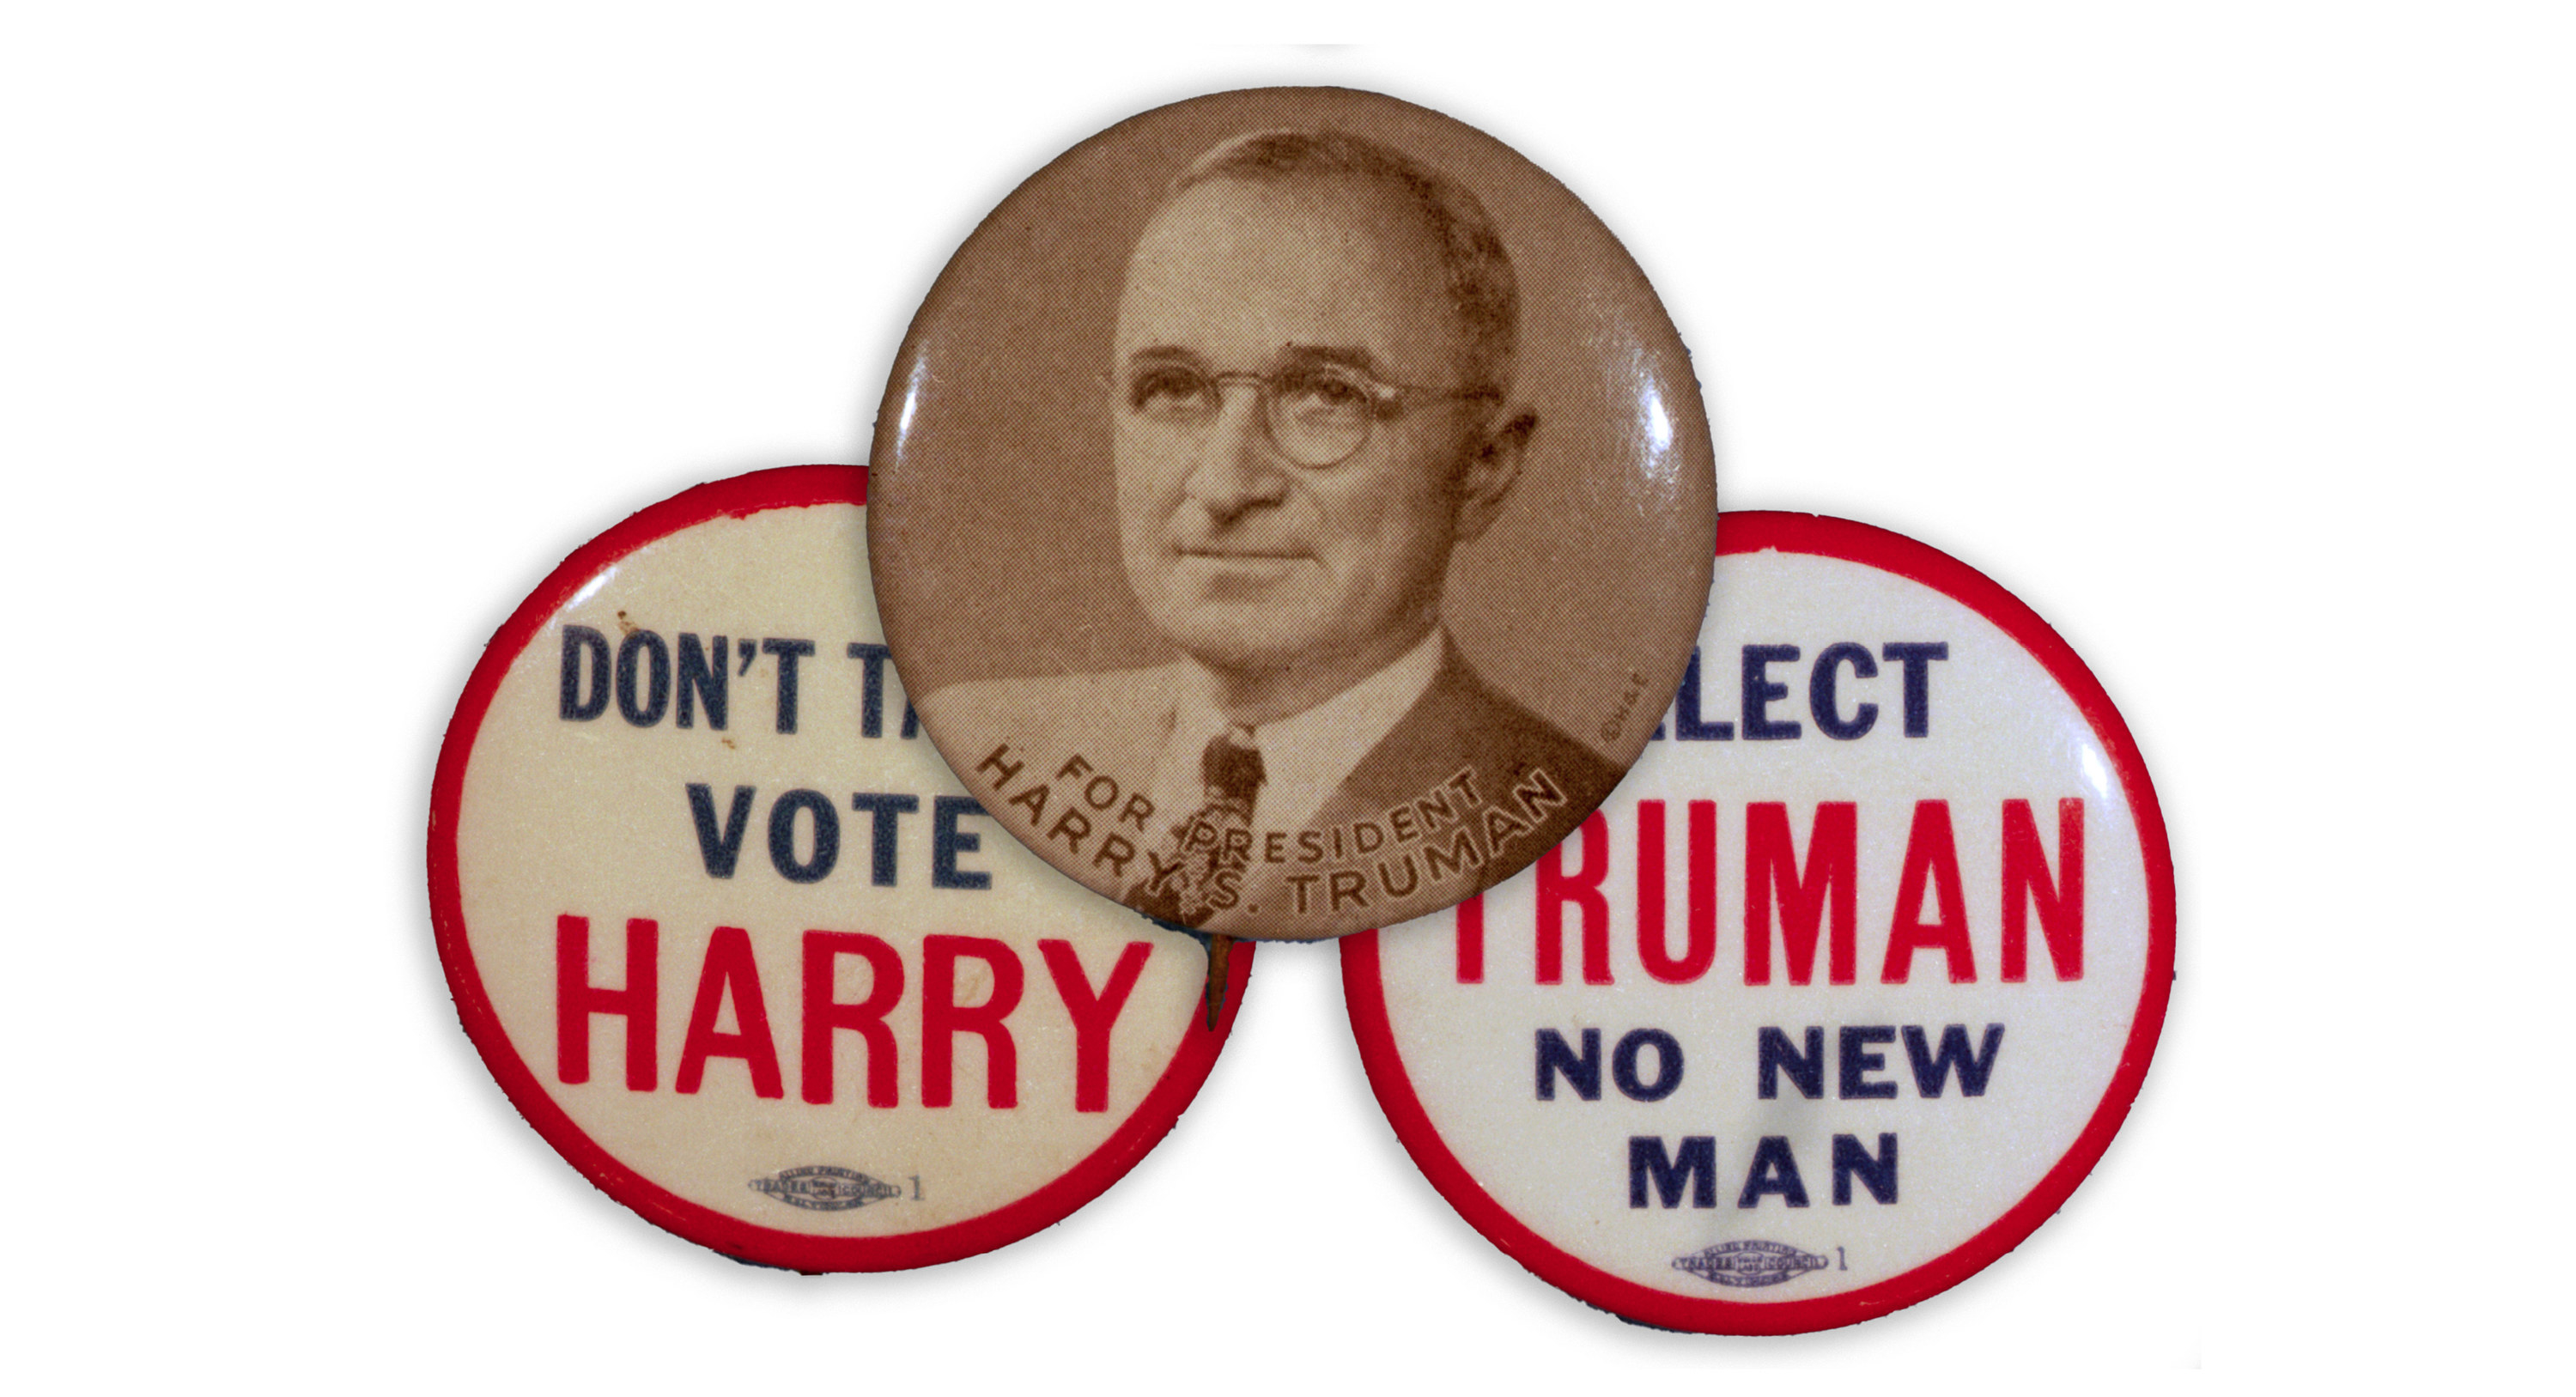 Buttons read read &quot;Don&#x27;t tarry, vote Harry&quot; and &quot;Elect Truman, no new man&quot; on either side of a button showing Truman&#x27;s face, reading &quot;Harry S Truman for president&quot;